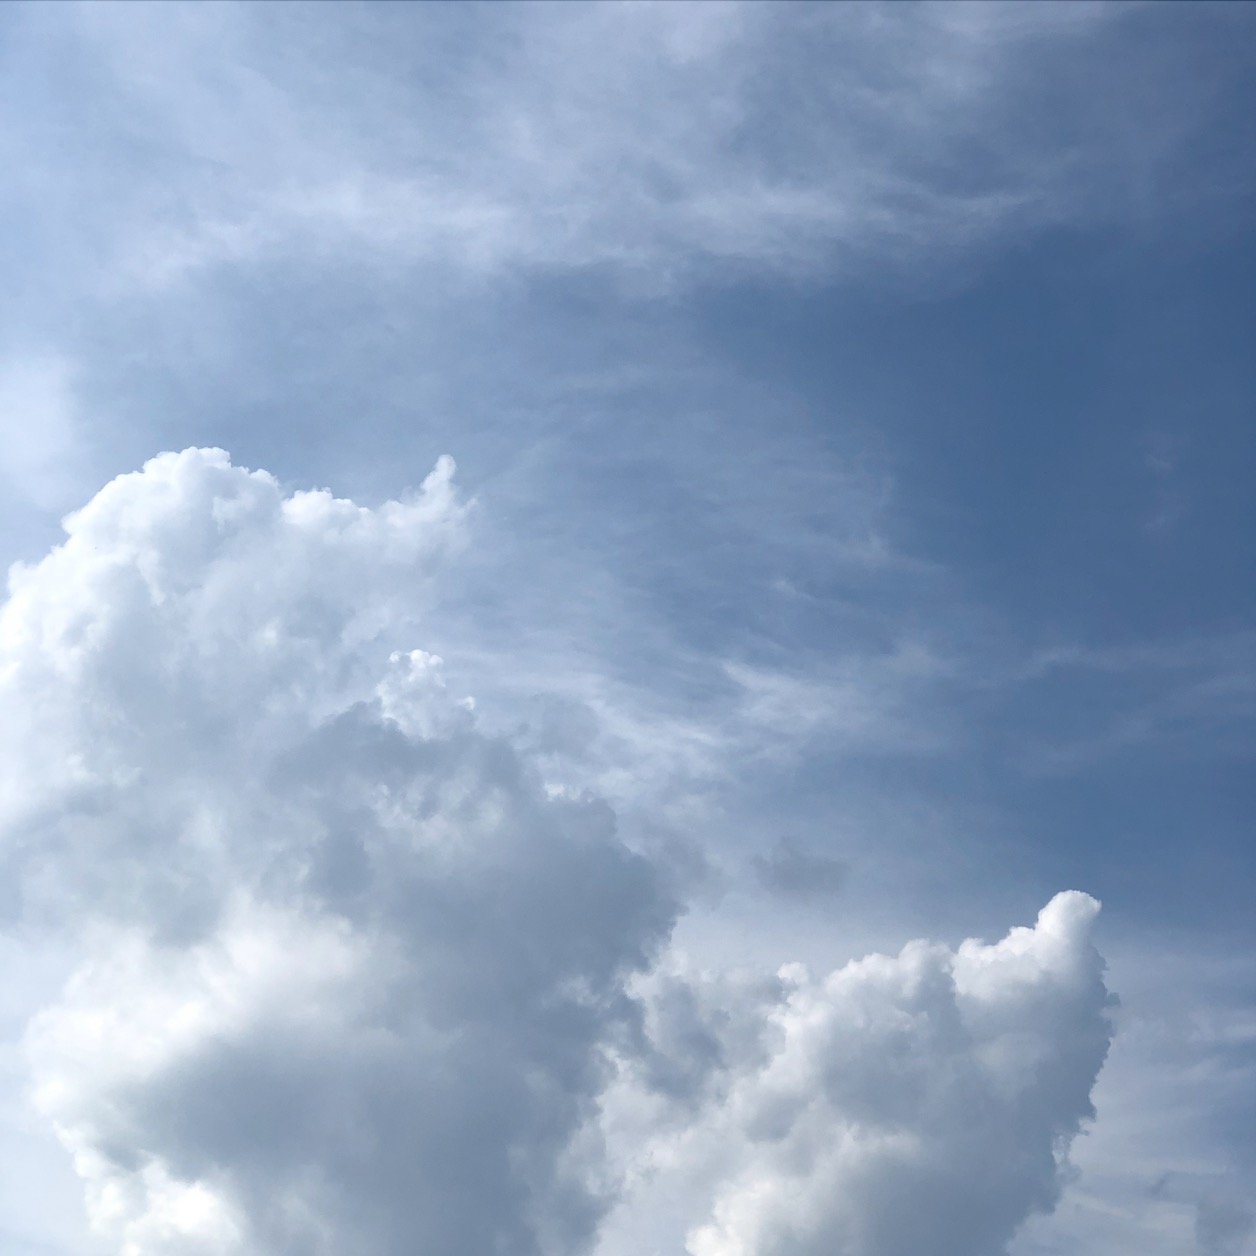 photo of white and gray clouds reaching up on a hazy blue sky